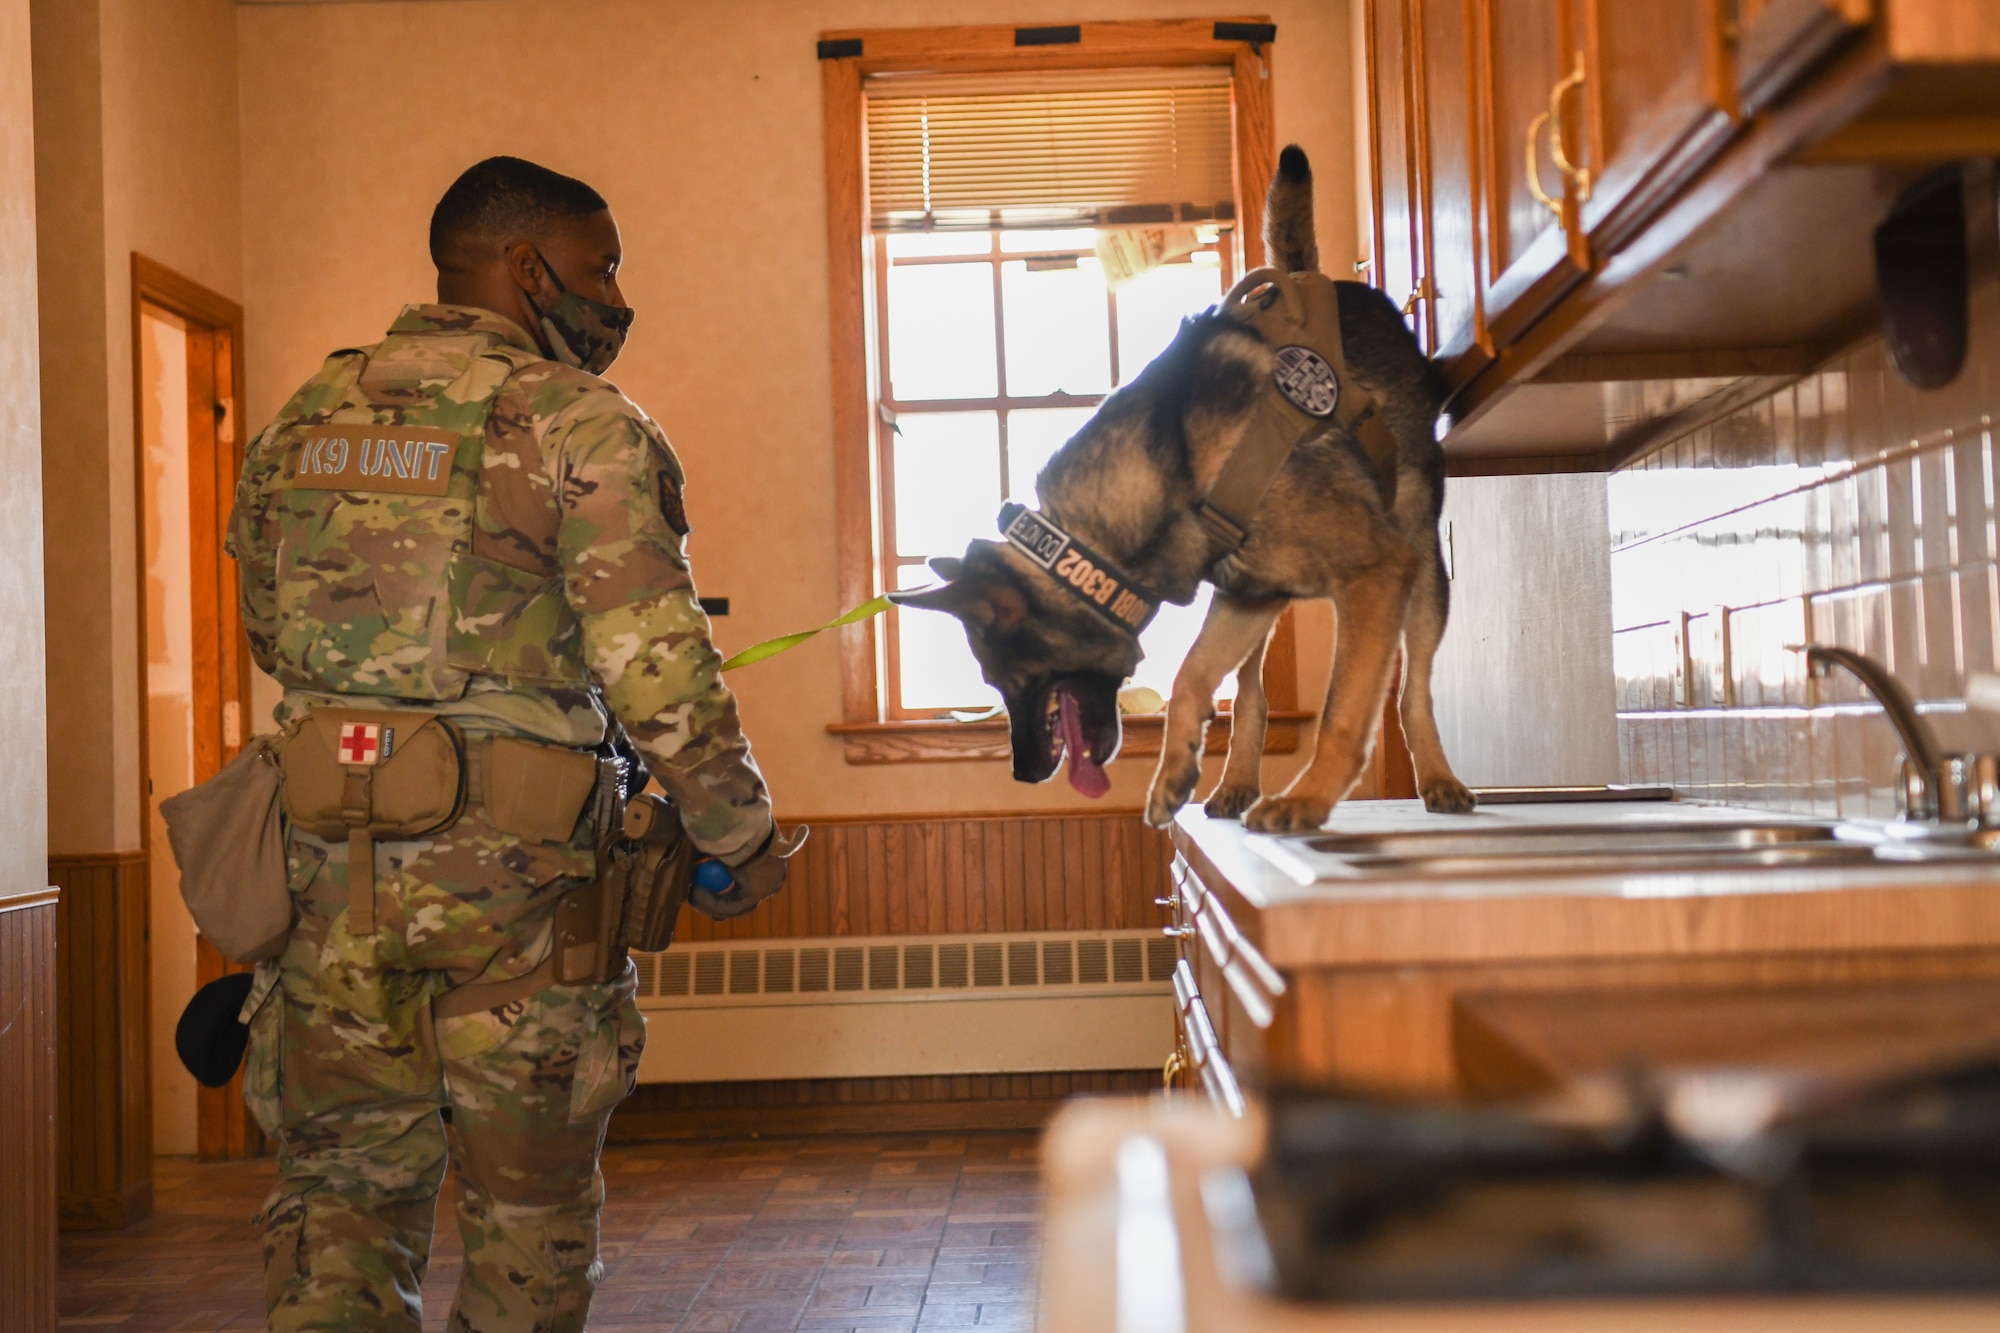 Staff Sgt. Trenton Clark, military working dog handler assigned to the 90th Security Forces Squadron, conducts certification with his MWD at F.E. Warren Air Force Base, Wyoming, Aug. 25, 2021. Certification is where a commander observes the handler and MWD identifying explosives through a simulated environment in order to certify that the team is capable of performing duties. The process is designed for the commander to instill trust in the MWD team. (U.S. Air Force photo by Airman 1st Class Charles Munoz)